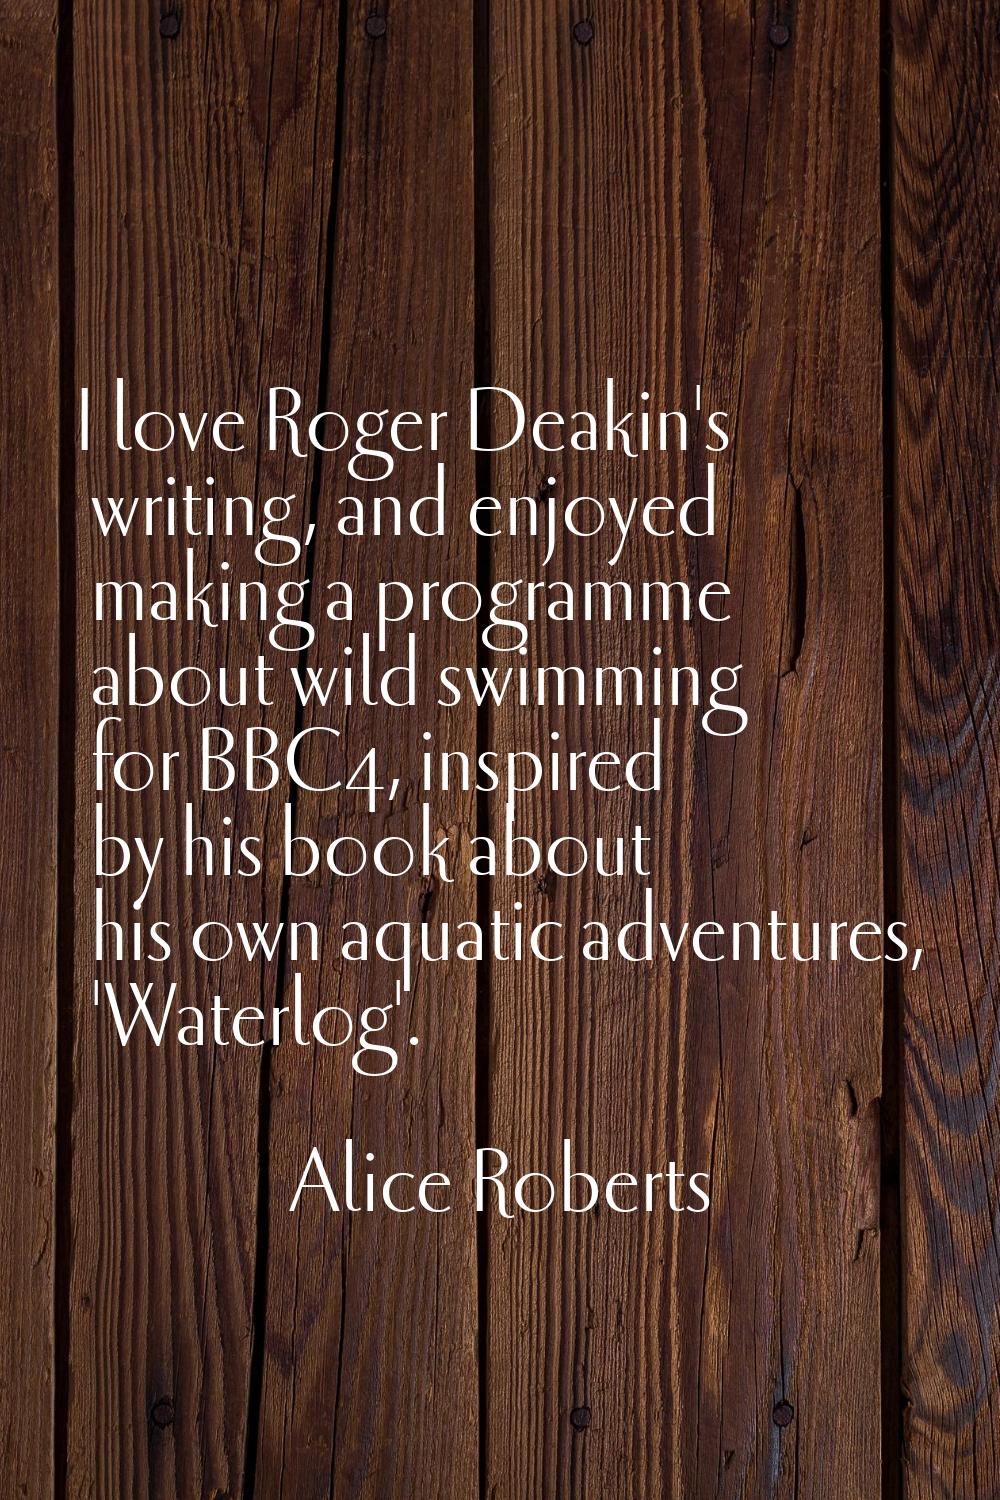 I love Roger Deakin's writing, and enjoyed making a programme about wild swimming for BBC4, inspire